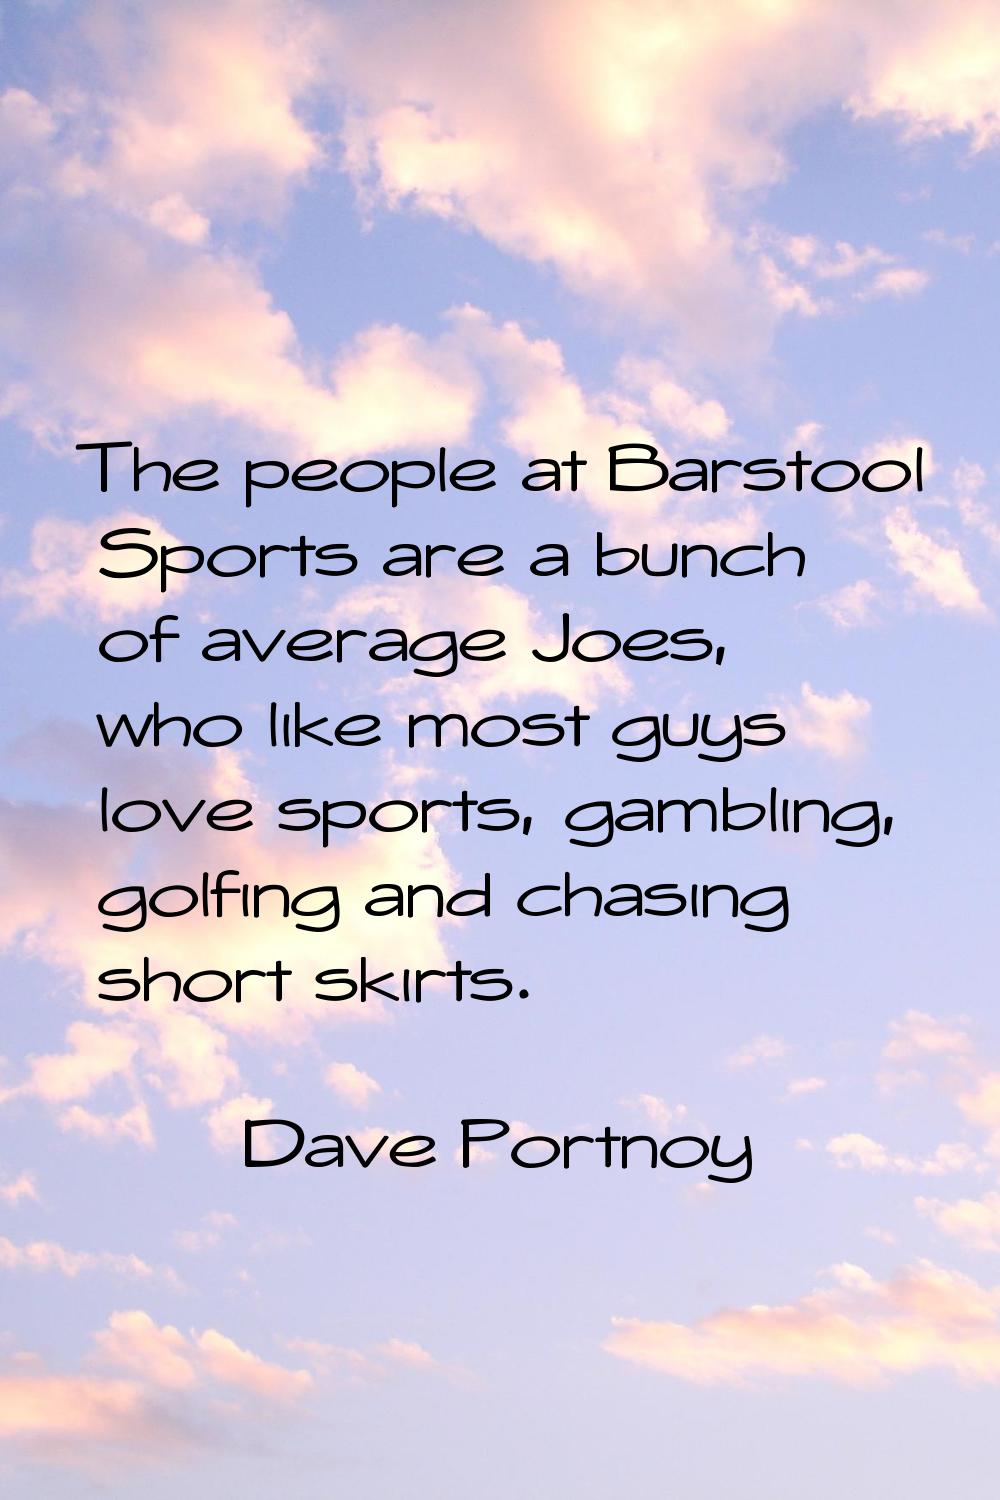 The people at Barstool Sports are a bunch of average Joes, who like most guys love sports, gambling